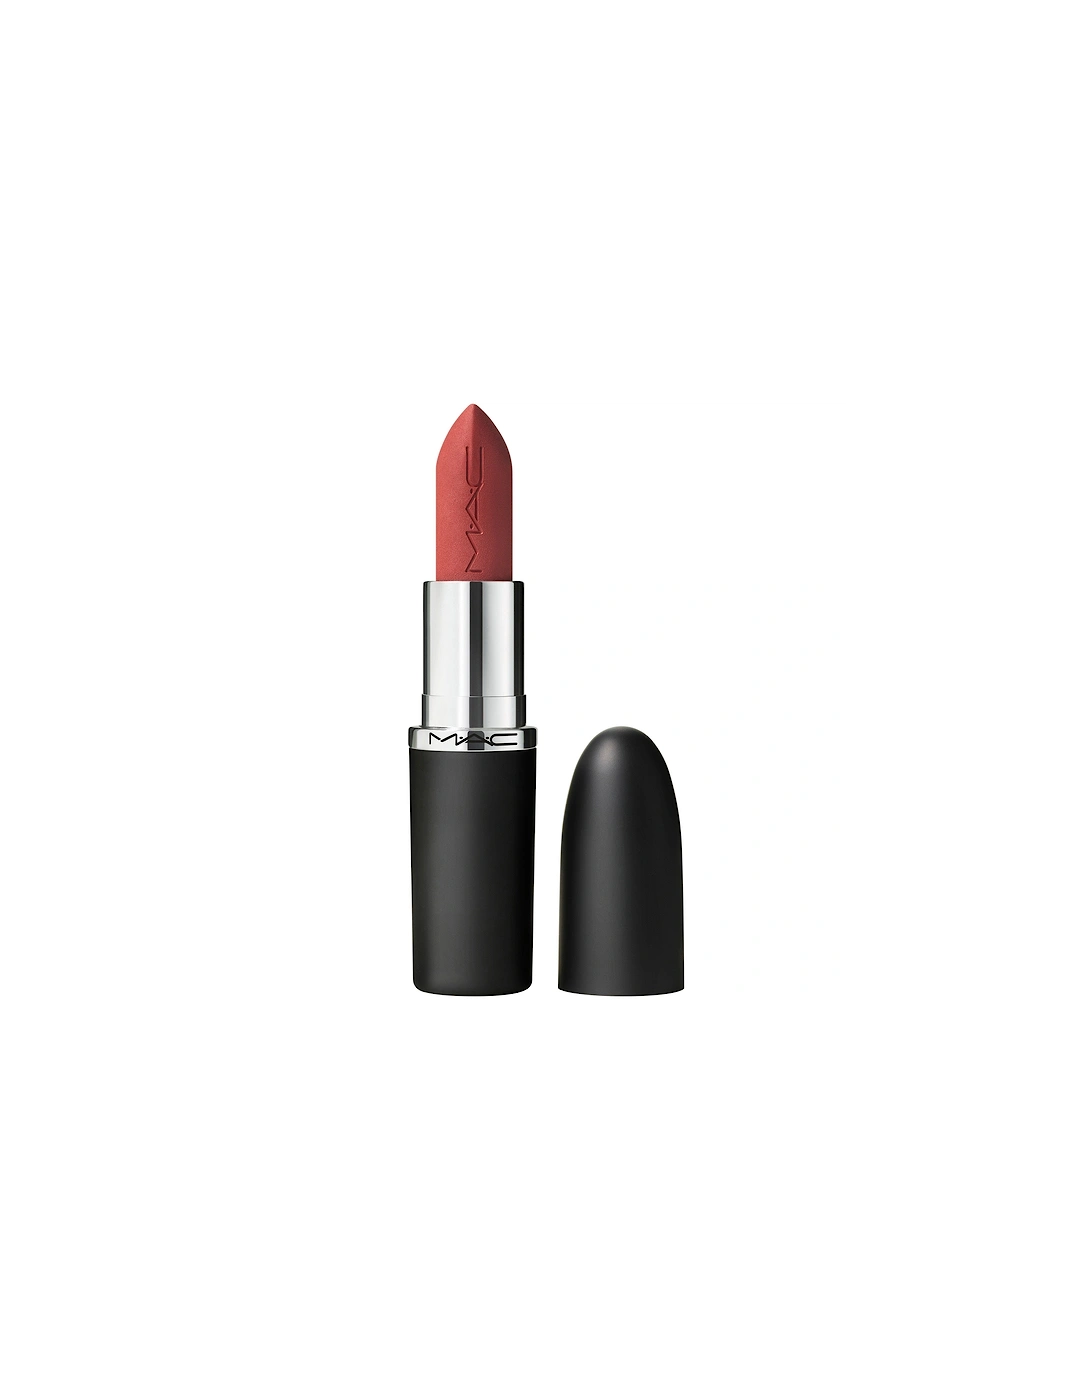 Macximal Matte Lipstick - Mull it to the Max, 2 of 1